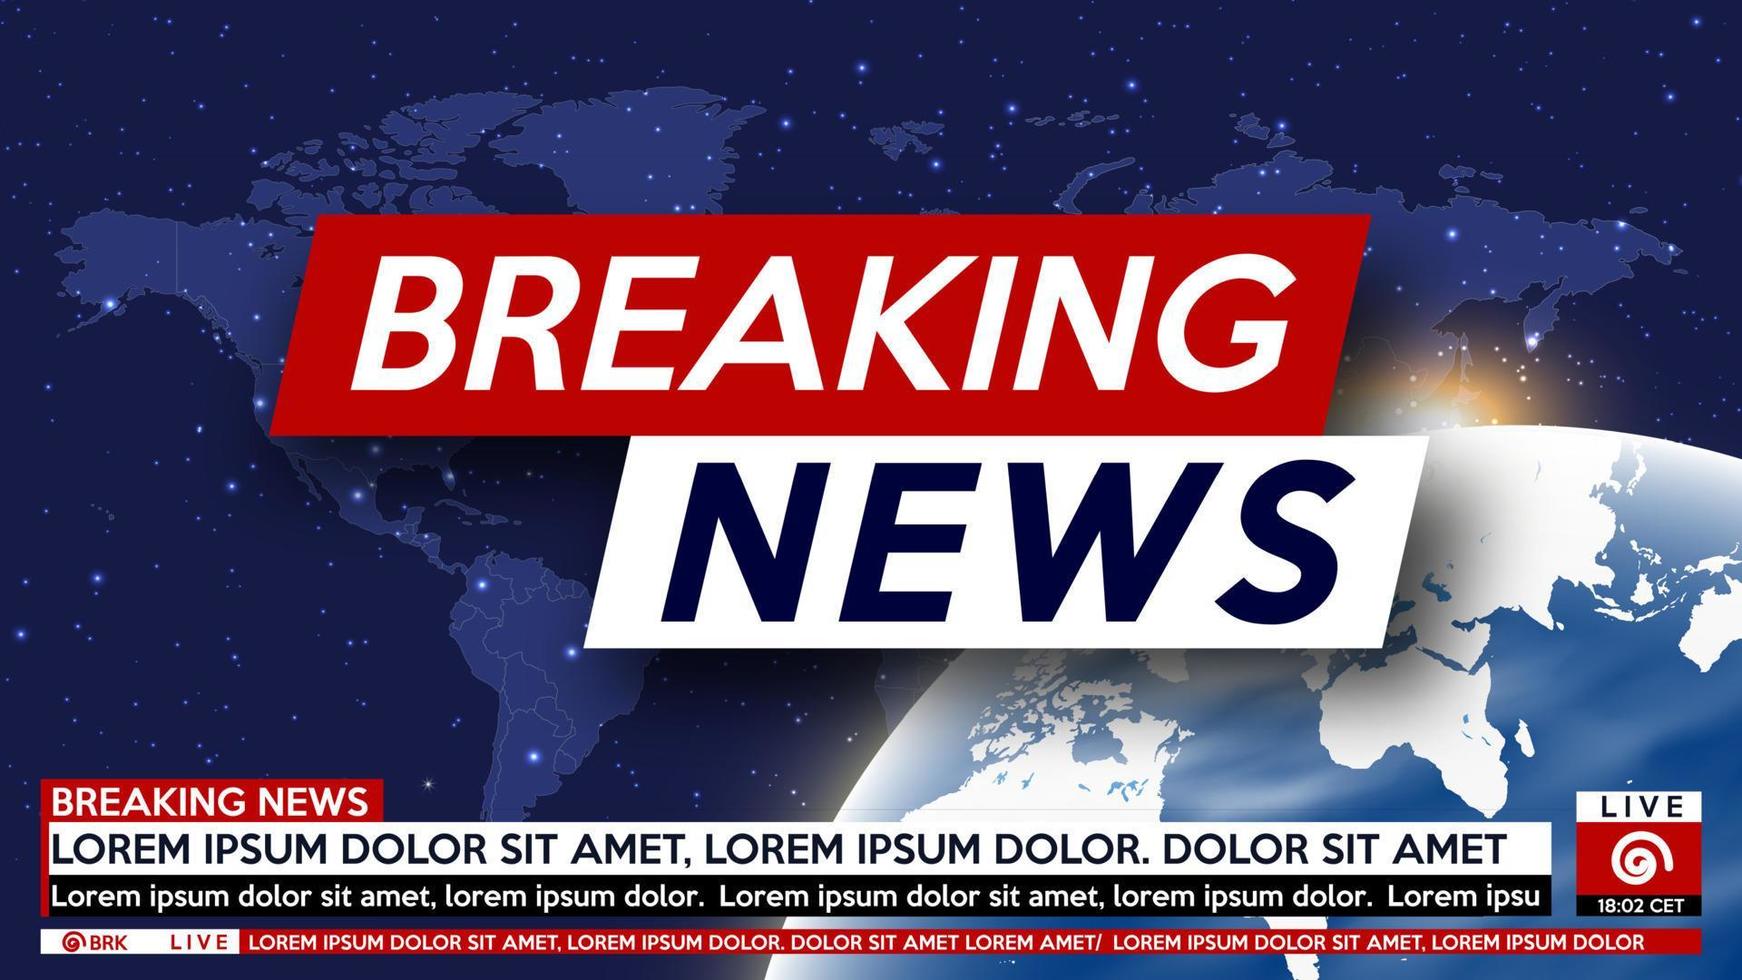 Screen saver on breaking news background. Urgent news release on television. Breaking news live on earth planet and world map background. vector